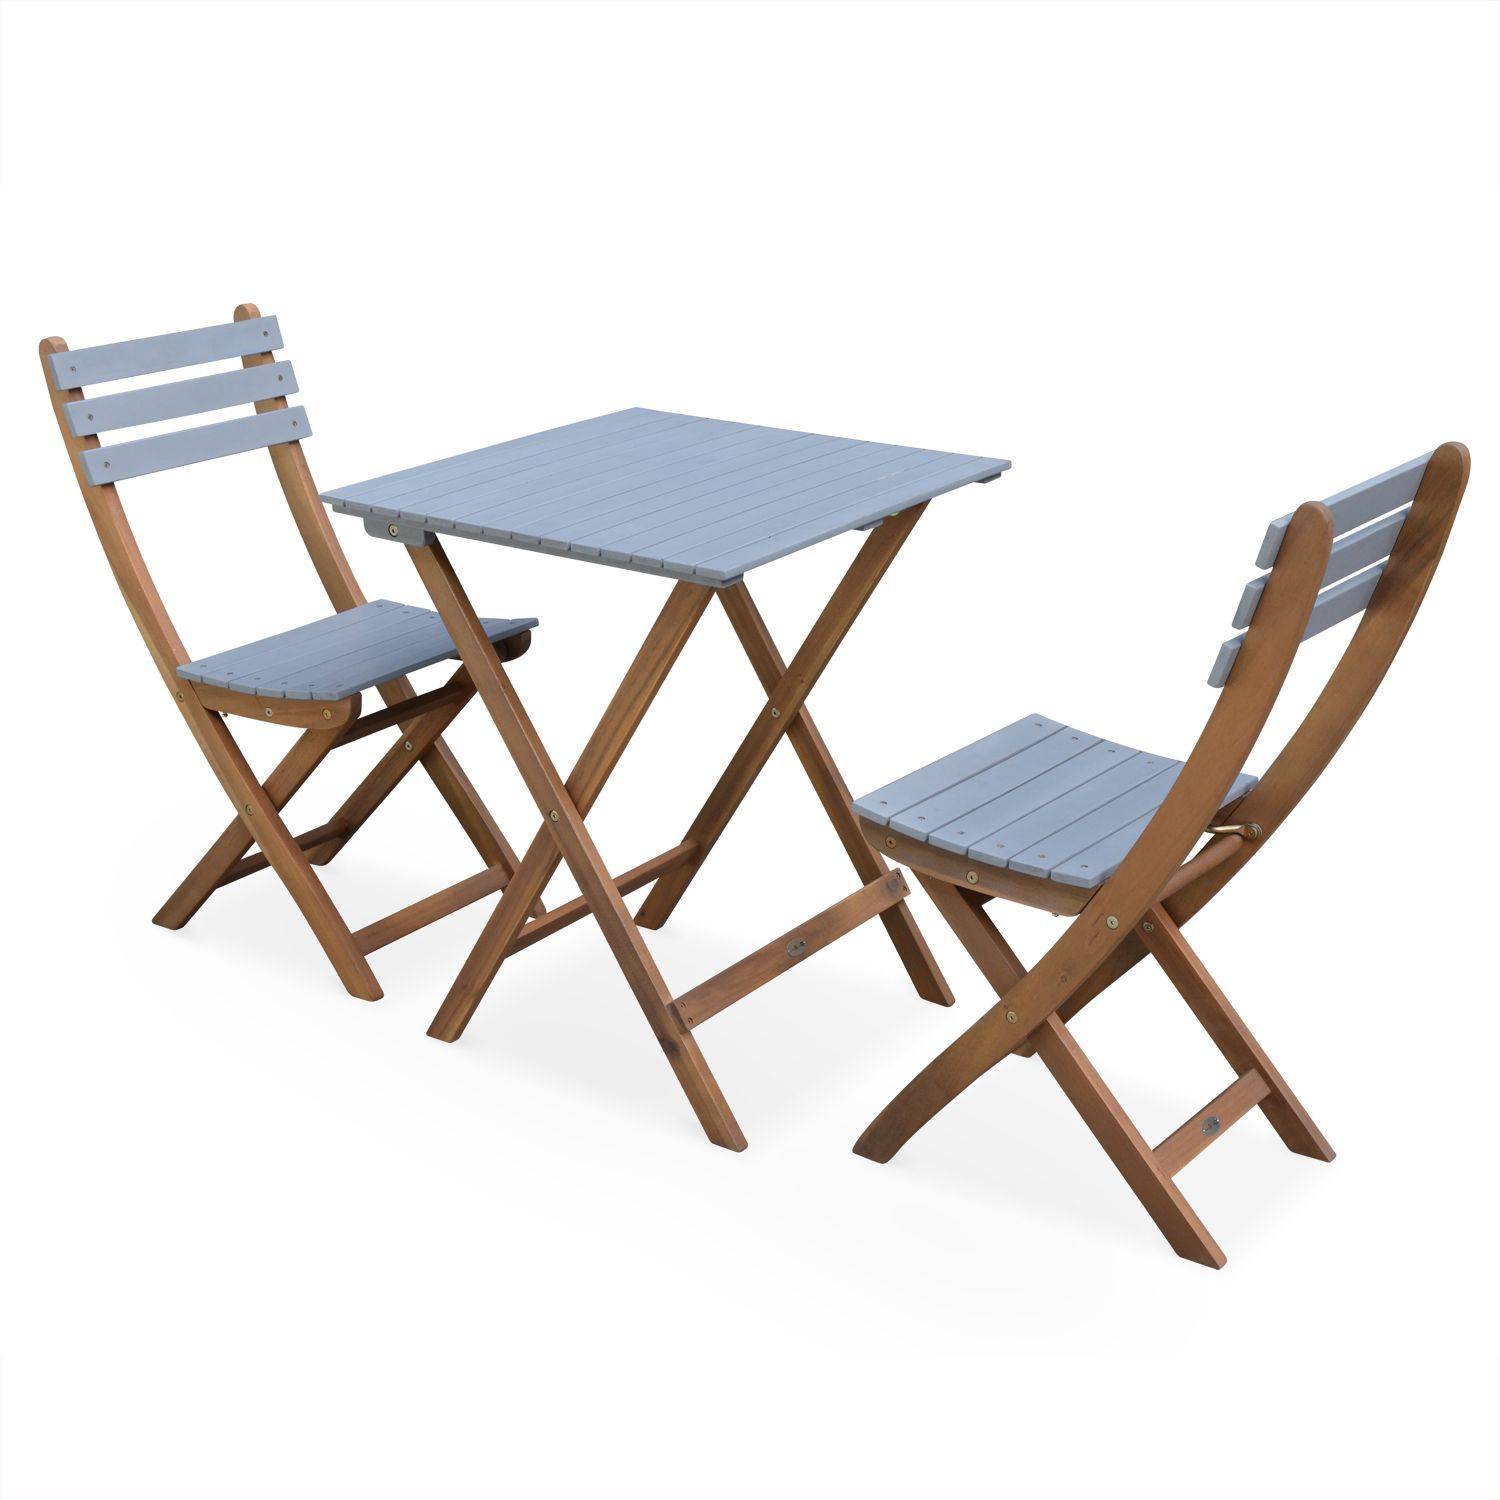 2-seater foldable wooden bistro garden table with chairs, 60x60cm - Barcelona - Light Grey Photo1